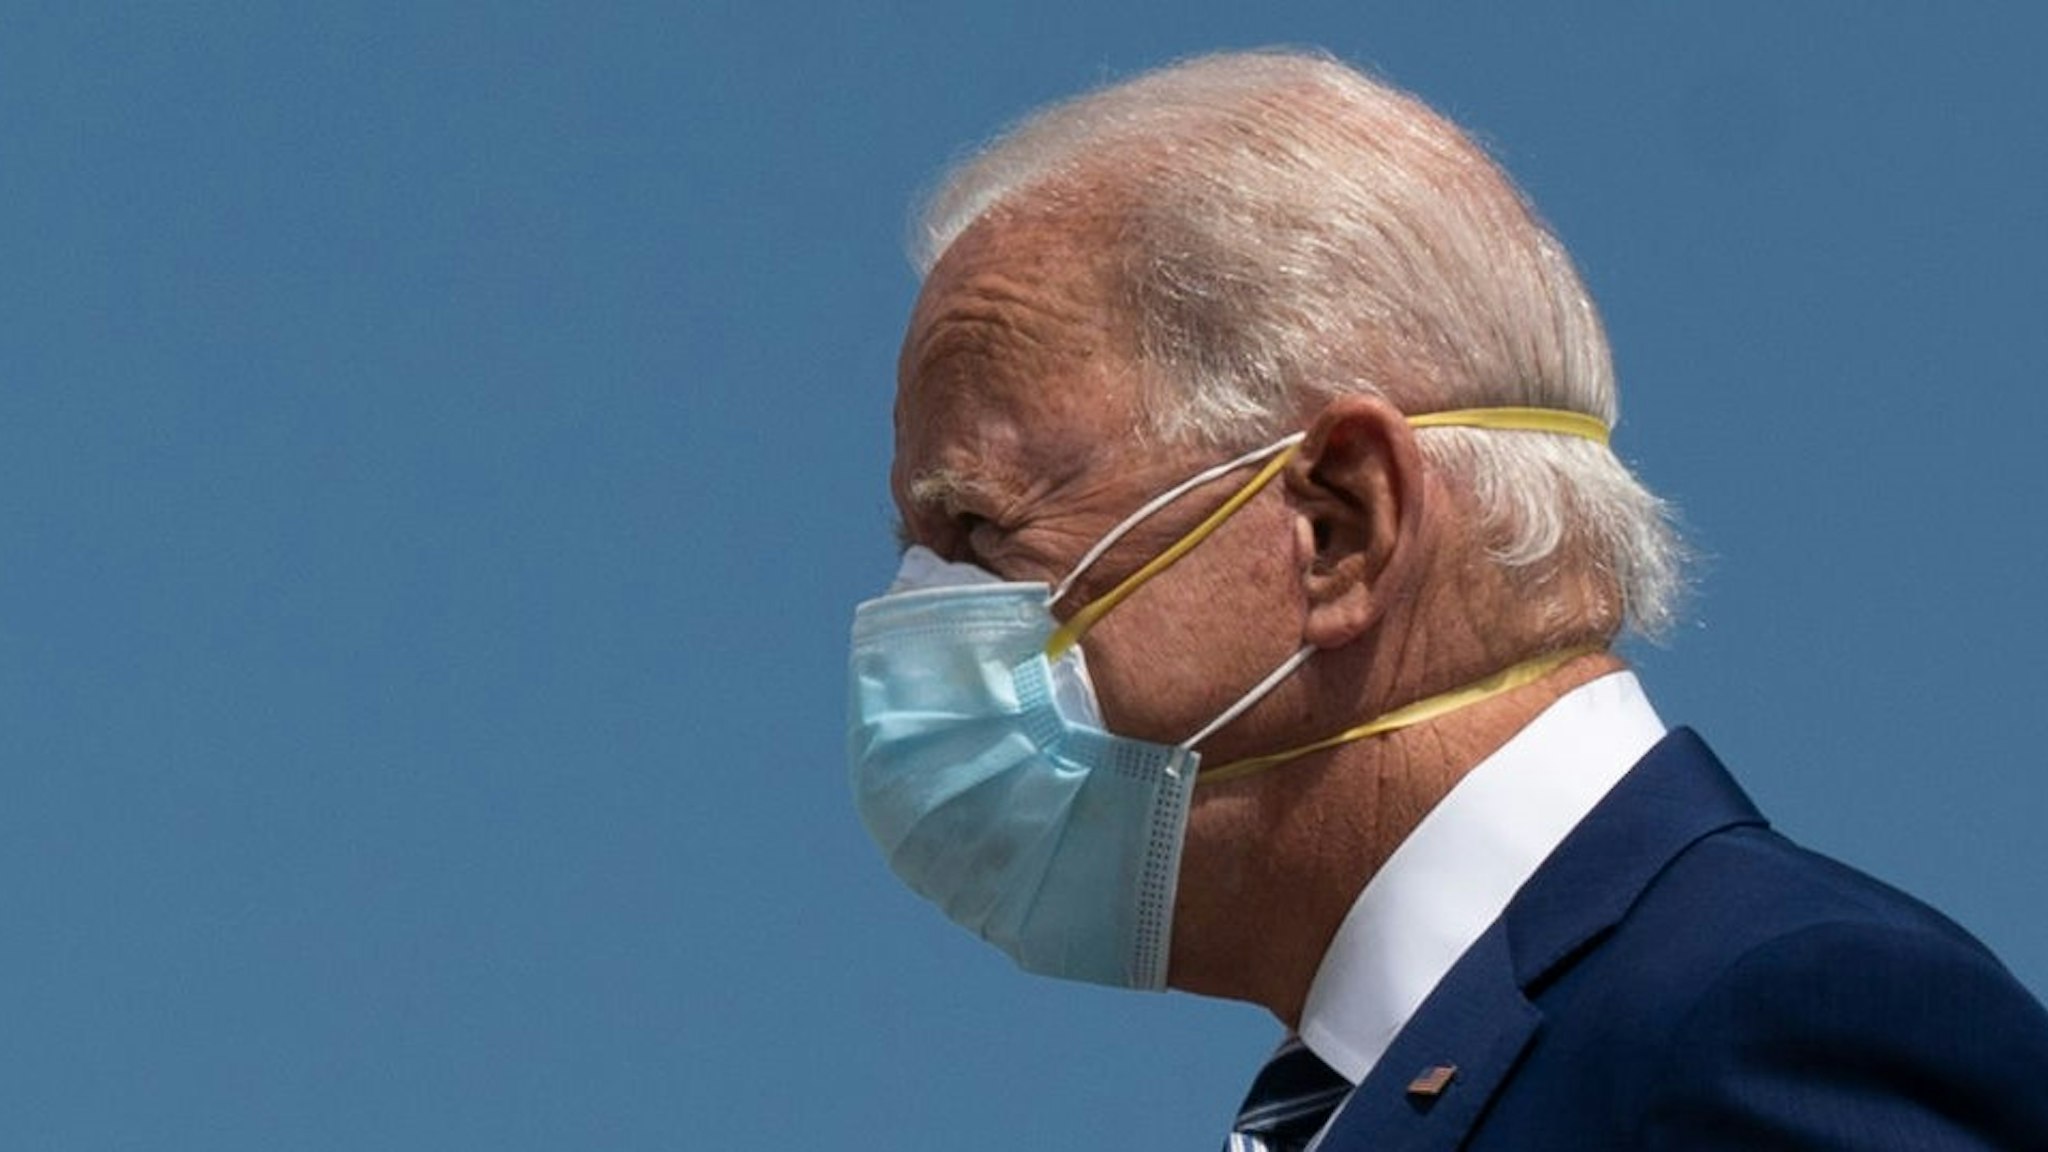 Democratic Presidential Candidate Joe Biden wears two masks as he arrives in Fort Lauderdale, Florida on October 13, 2020. - Joe Biden headed for Florida on Tuesday to court elderly Americans who helped elect Donald Trump four years ago but appear to be swinging to the Democratic candidate for the White House this time around amid the coronavirus pandemic. Biden, at 77 the oldest Democratic nominee ever, is to "deliver his vision for older Americans" at an event in the city of Pembroke Pines, north of Miami, his campaign said. (Photo by JIM WATSON / AFP) (Photo by